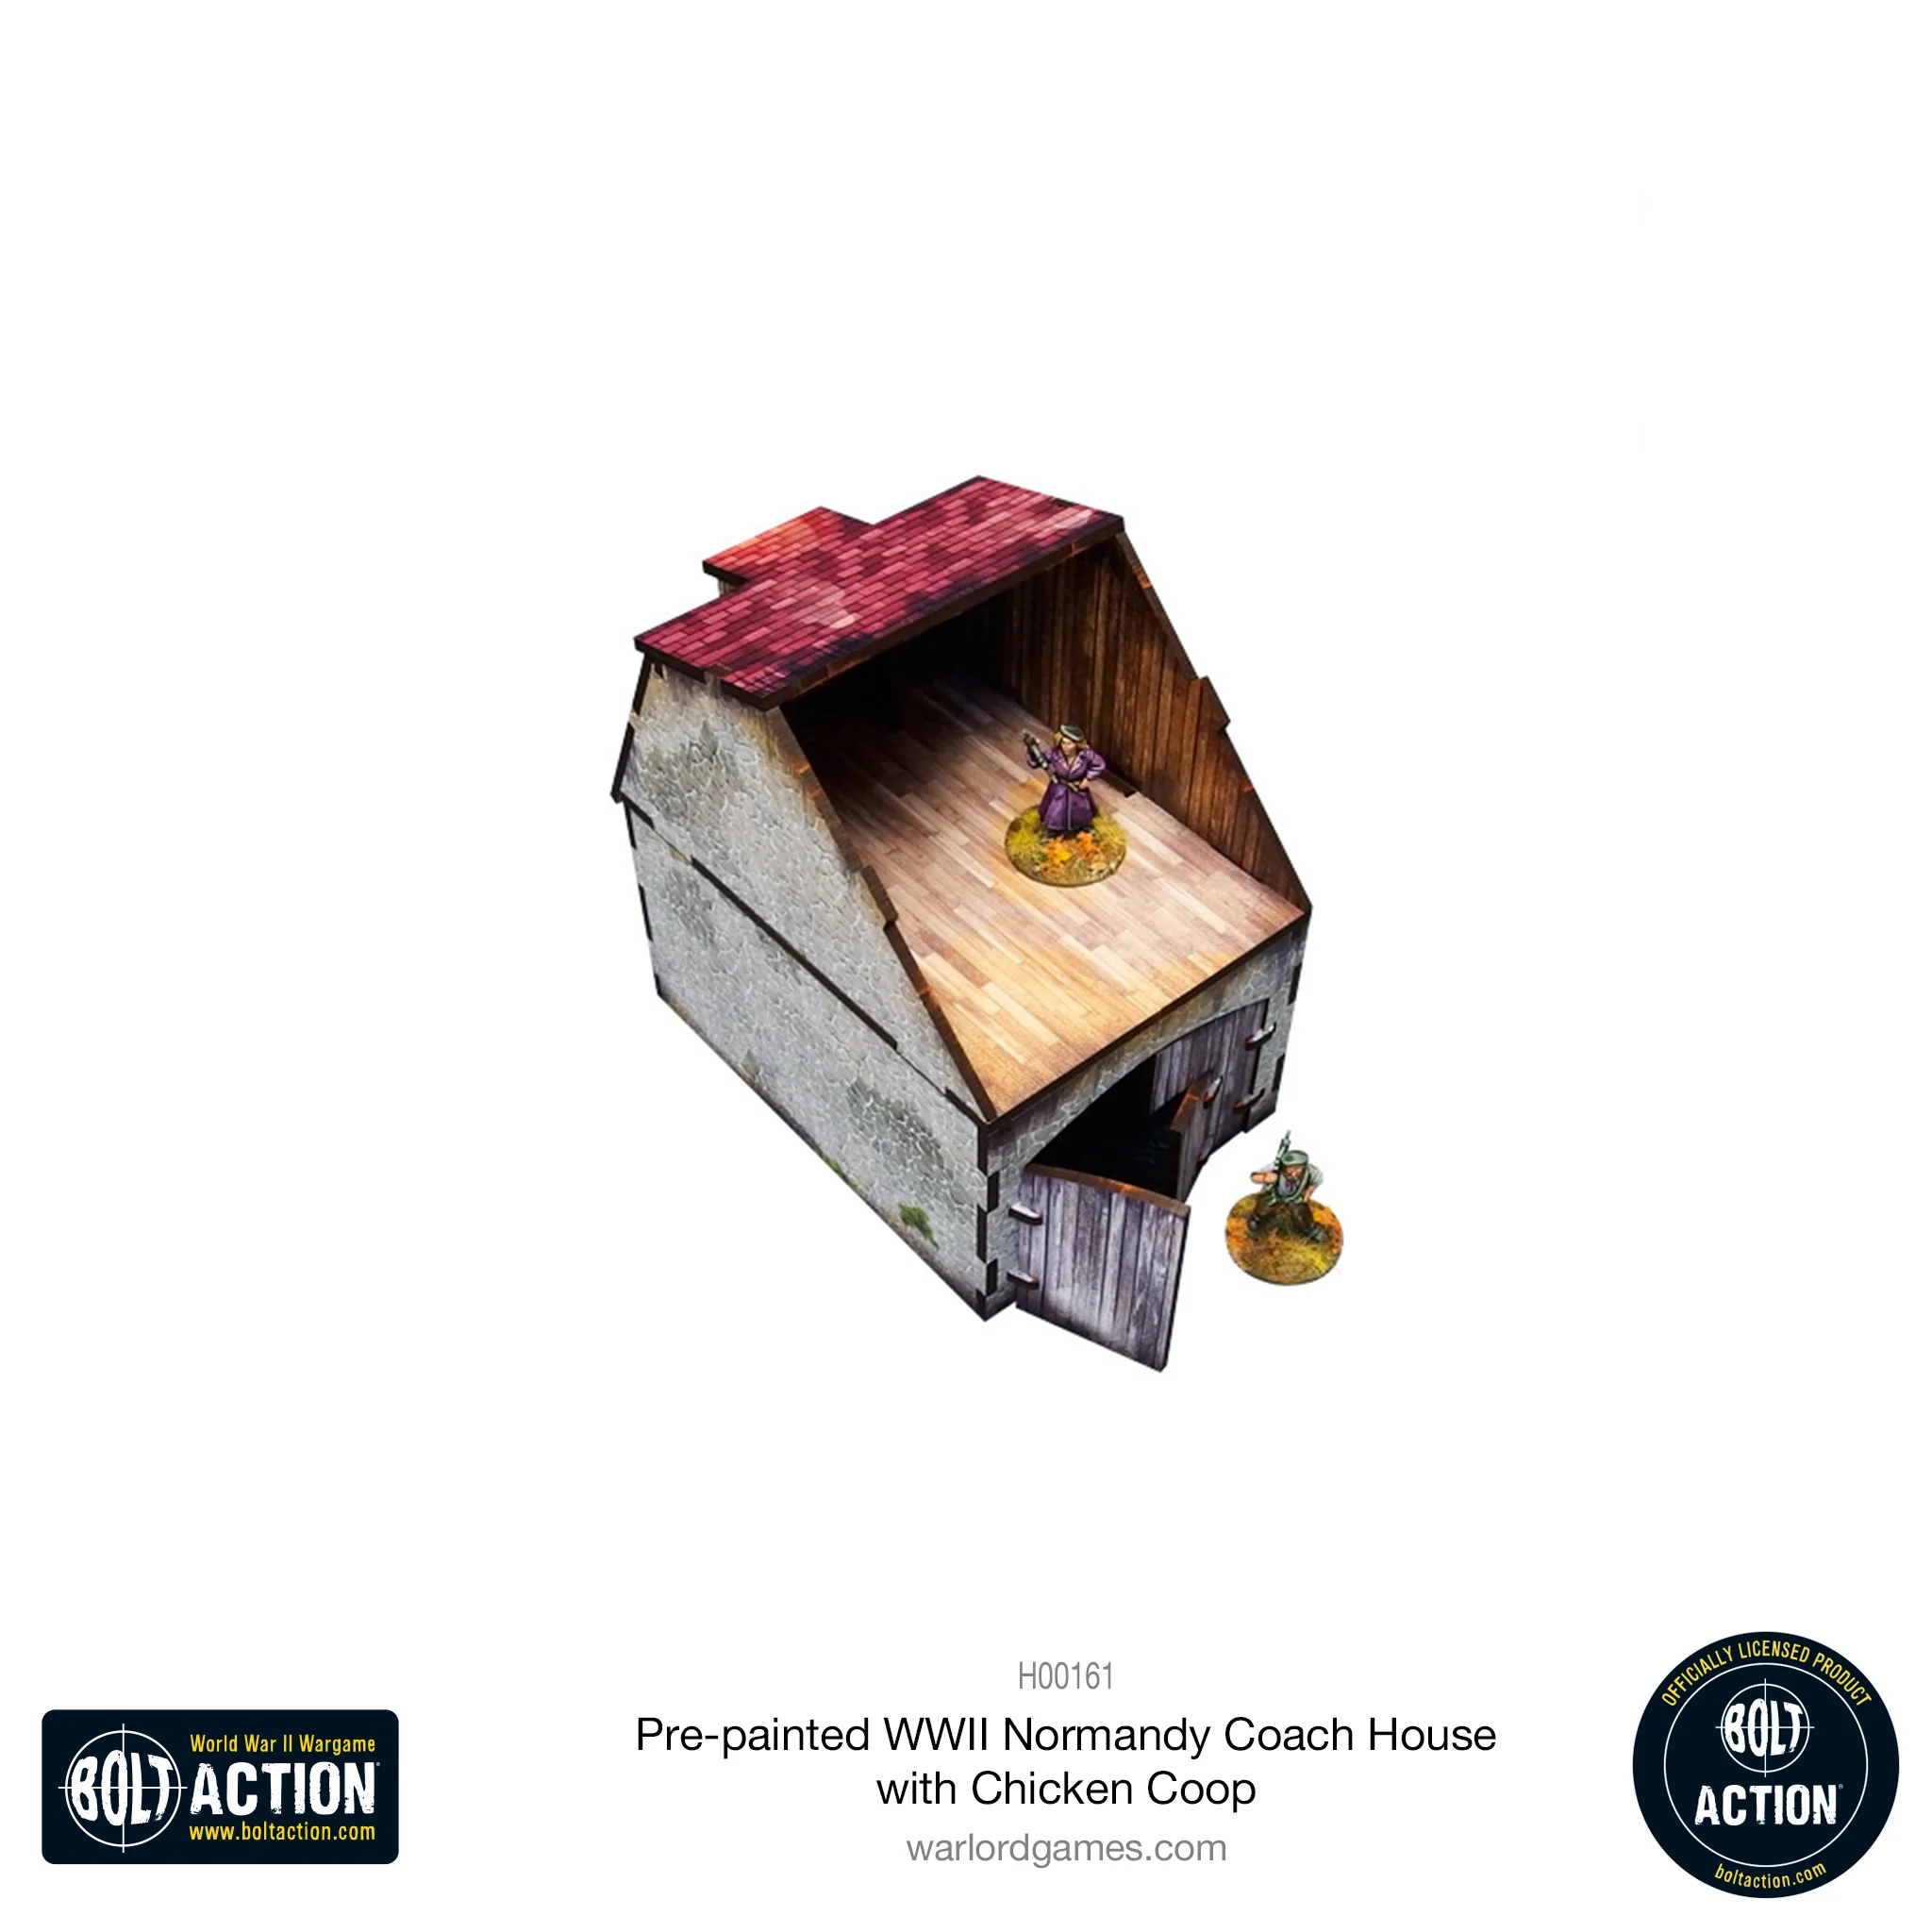 Bolt Action: Pre-Painted WWII Normandy Coach House With Chicken Coop-1711116717-65lDh.webp